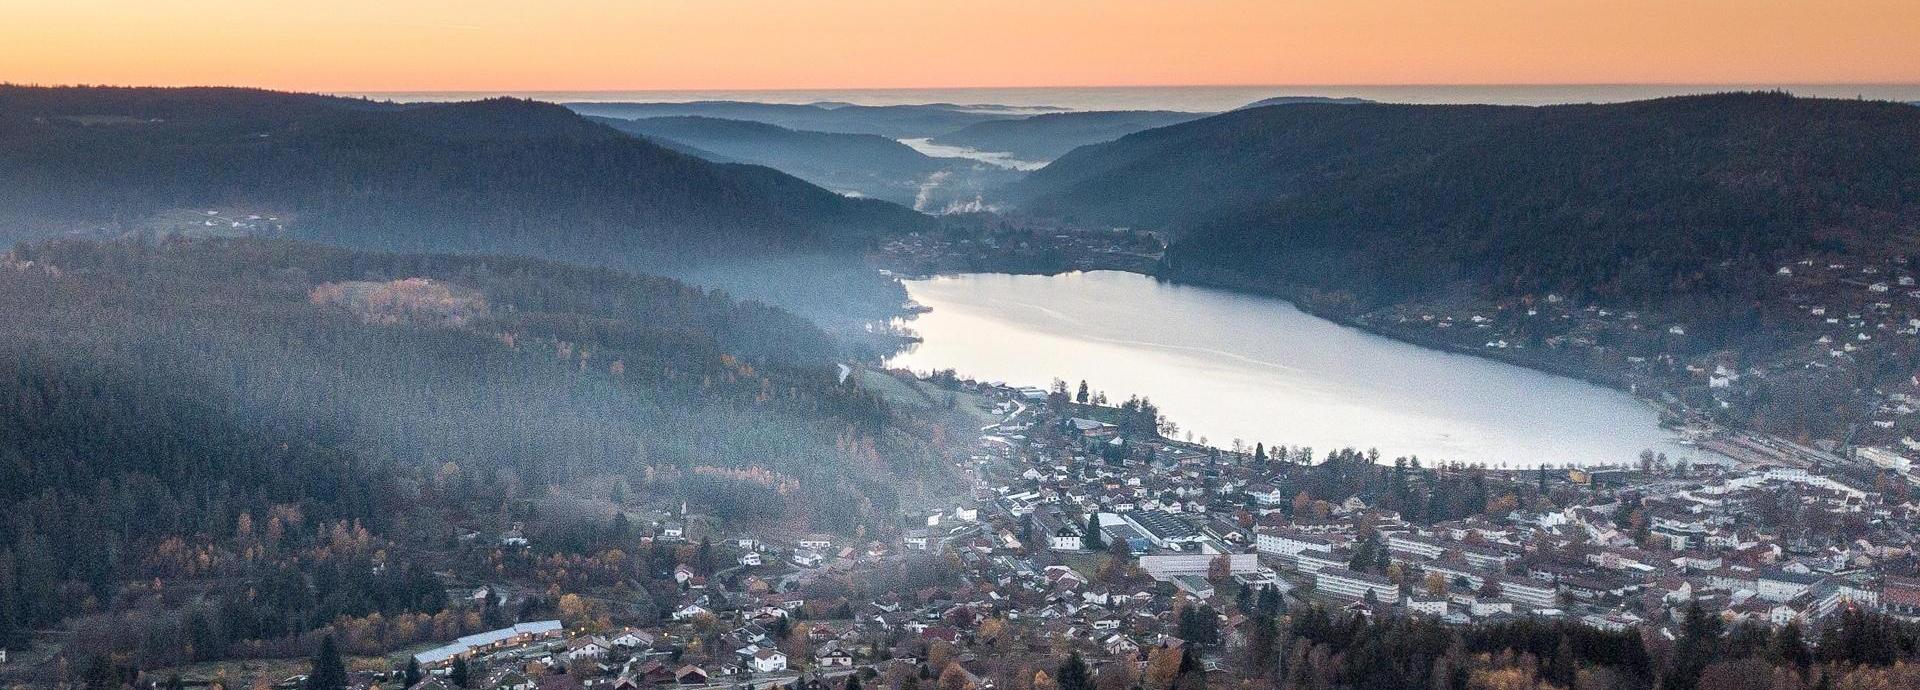 Gérardmer, the pearl of the Vosges